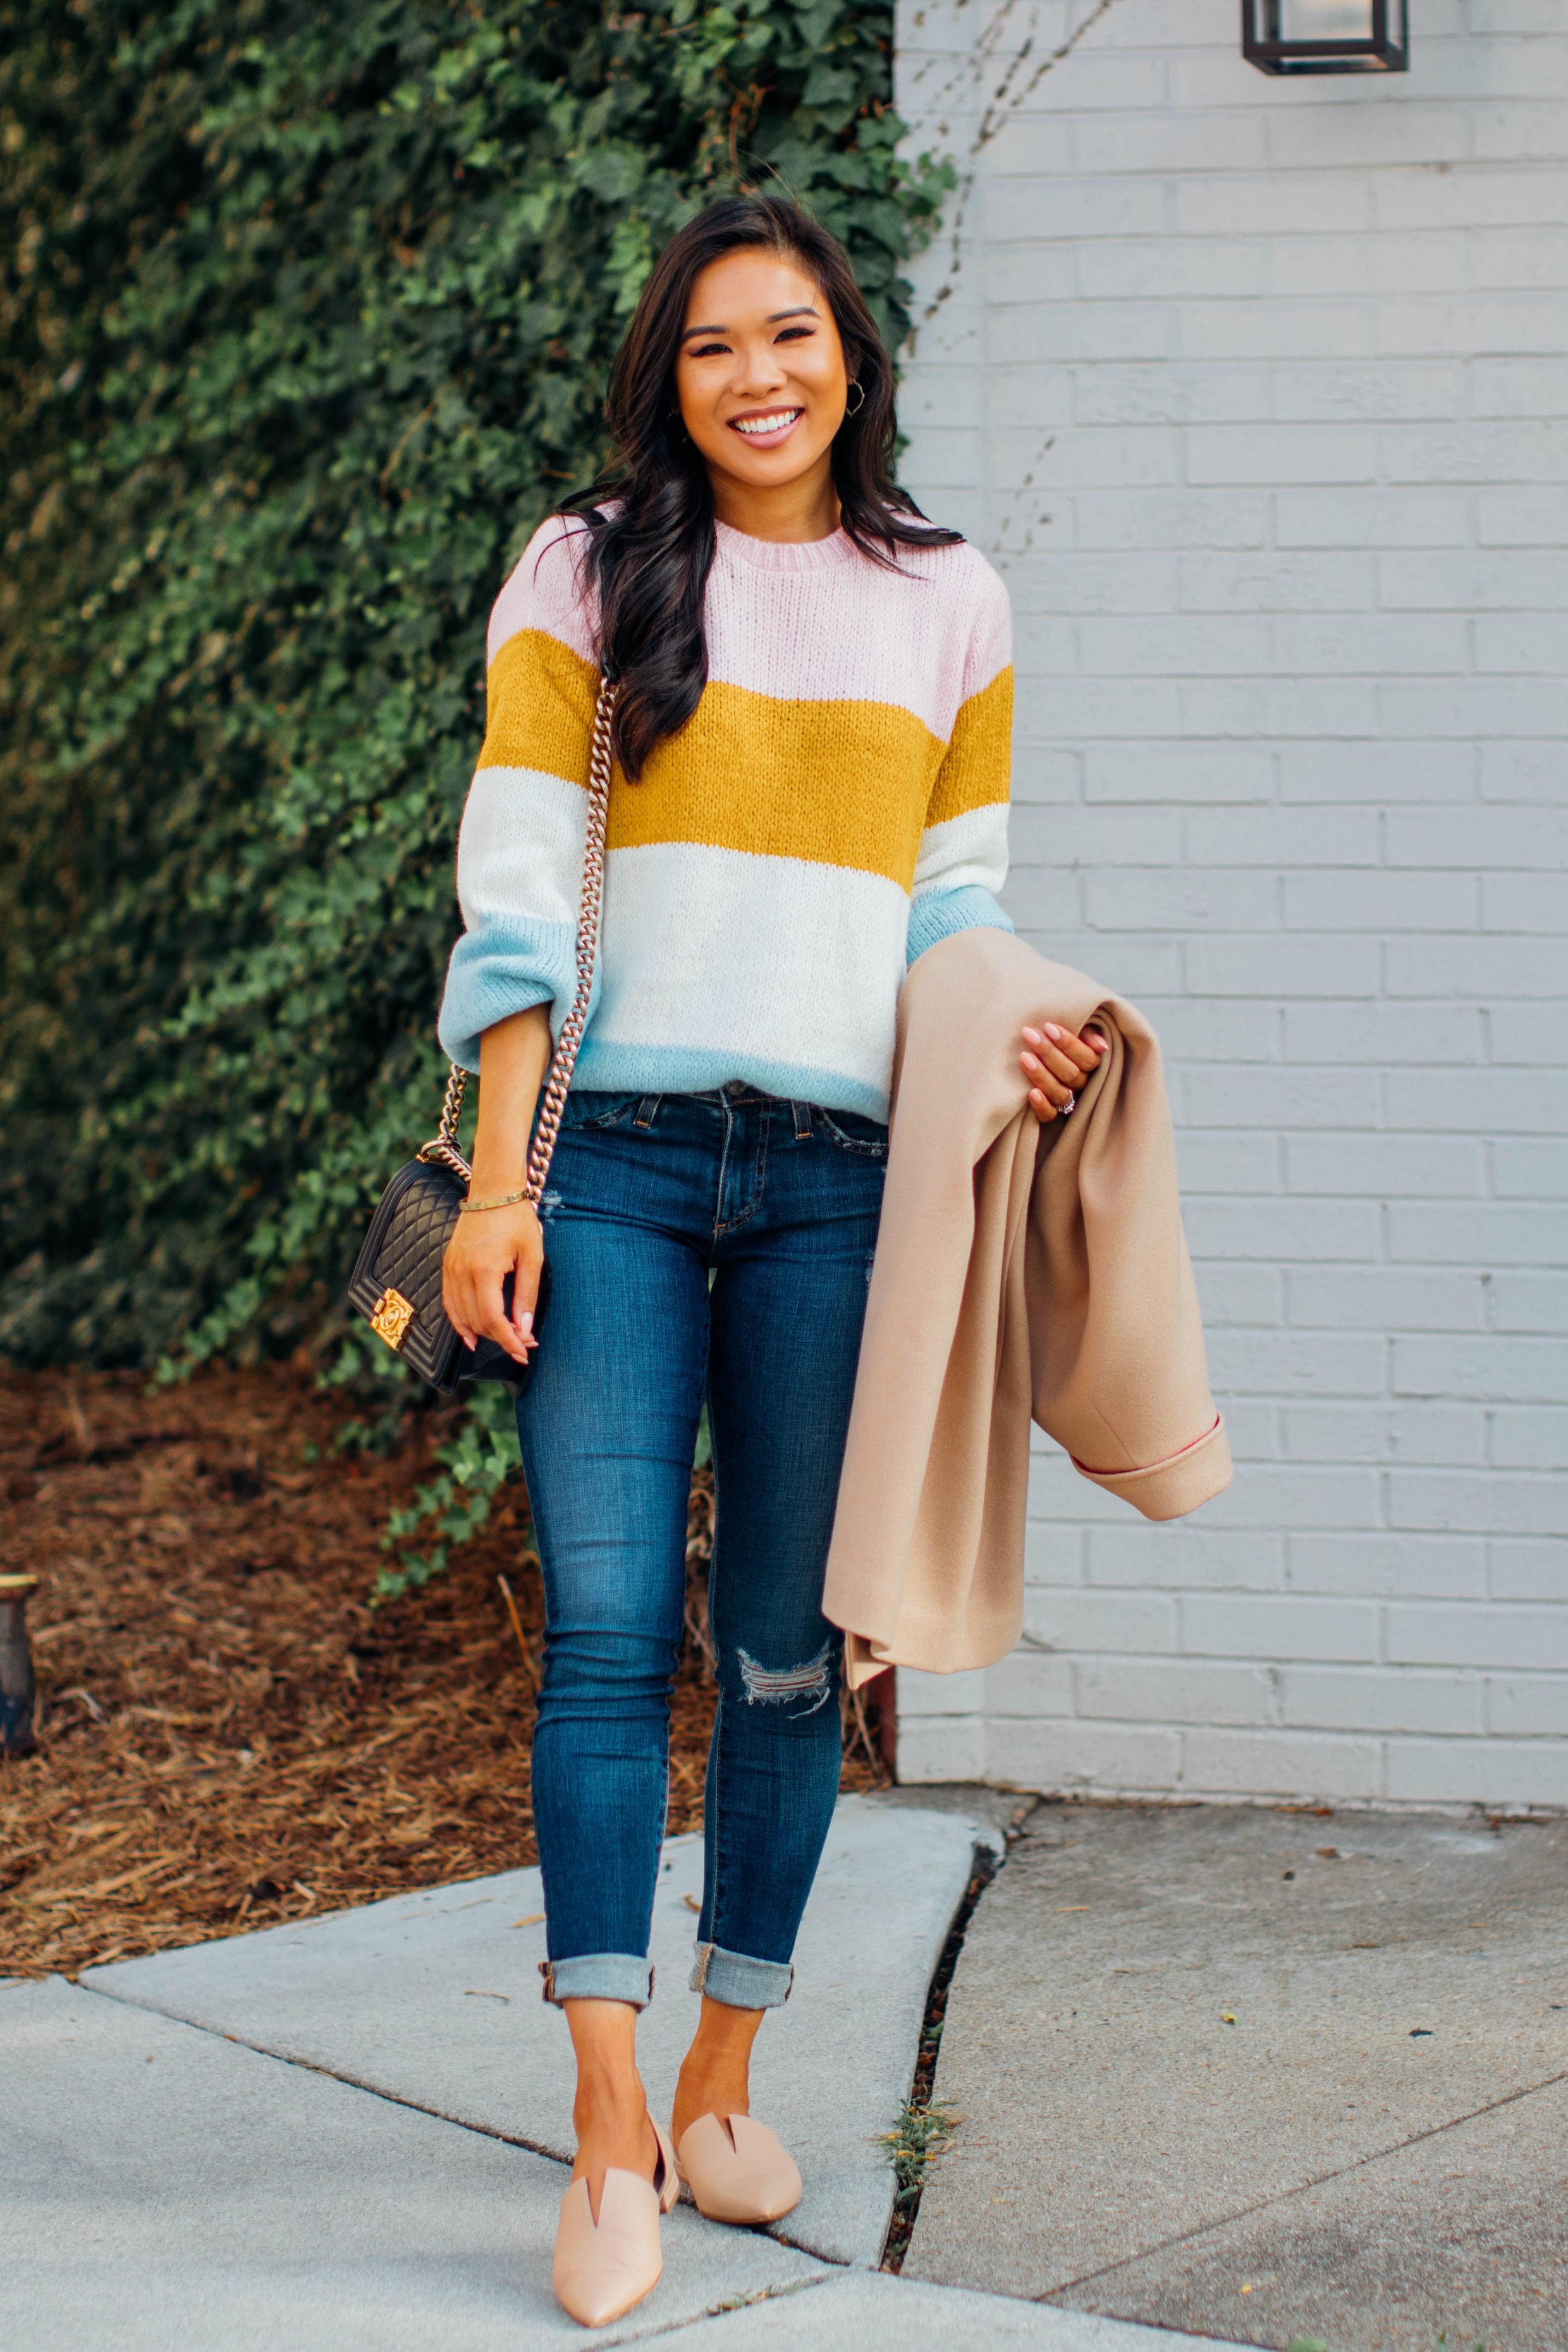 Blogger Hoang-Kim wears a striped transition sweater for fall